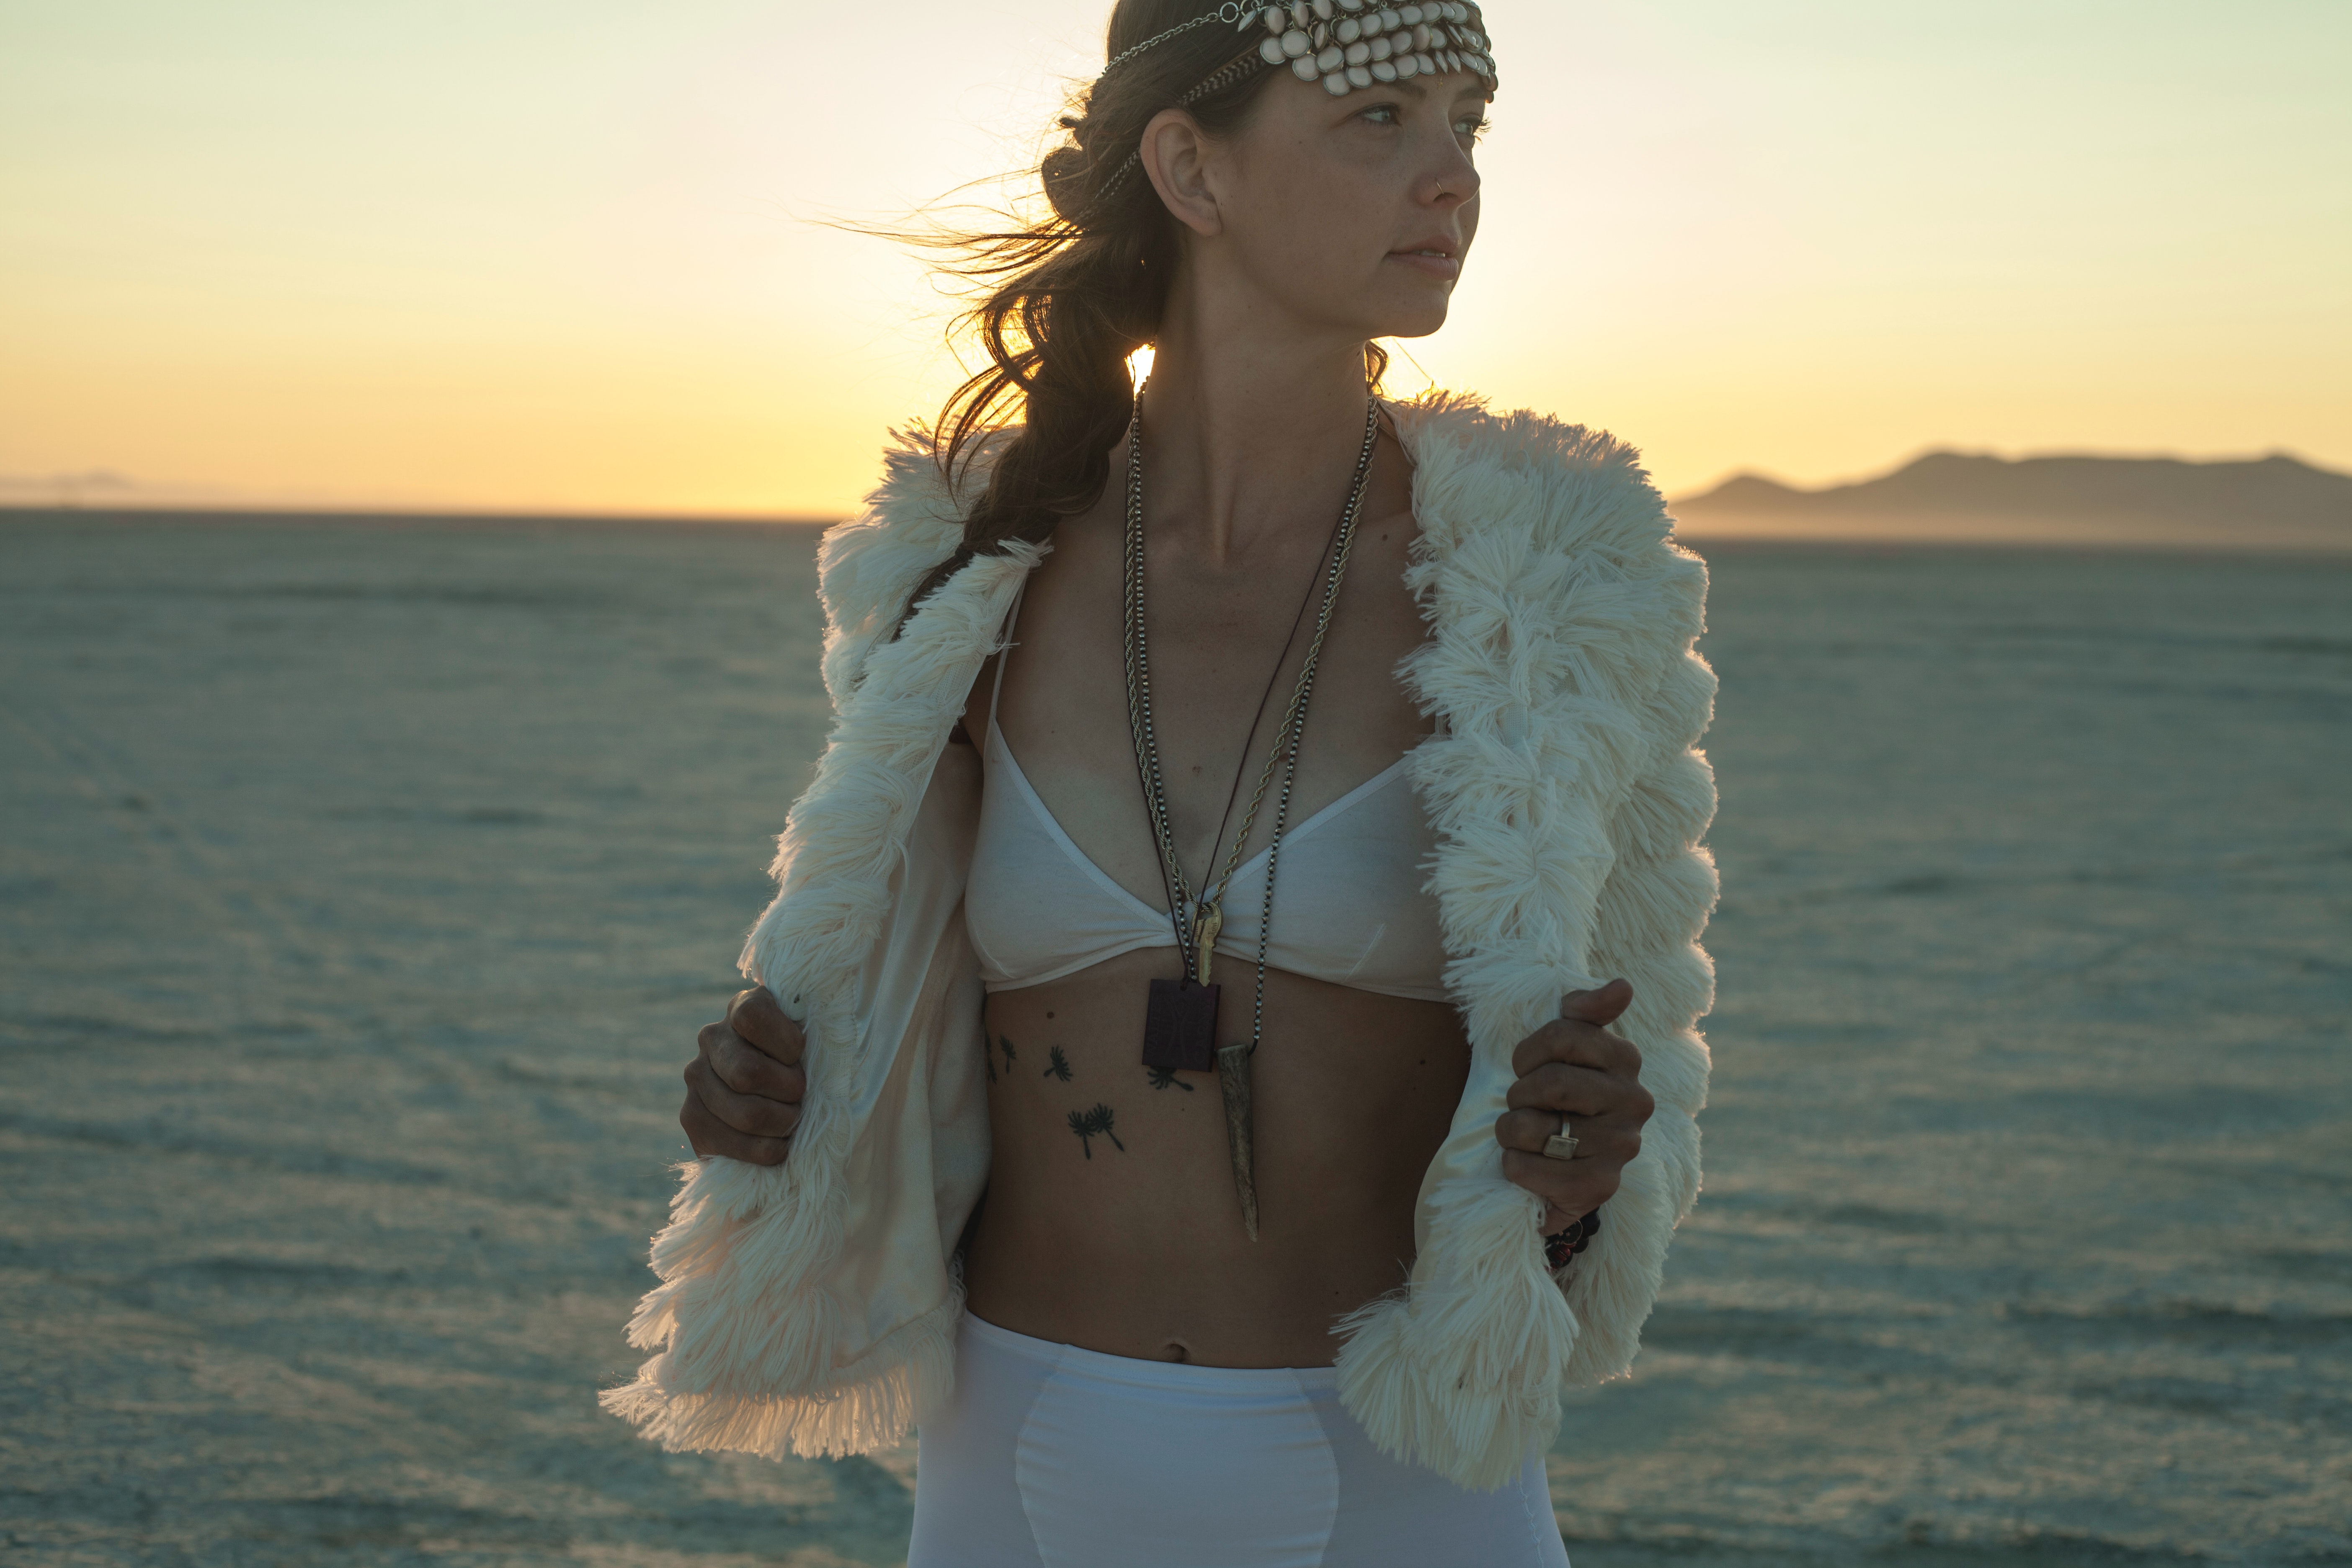 Photo by imustbedead  : https://www.pexels.com/photo/woman-in-white-fur-jacket-and-white-skirt-standing-on-beach-during-sunset-11829243/